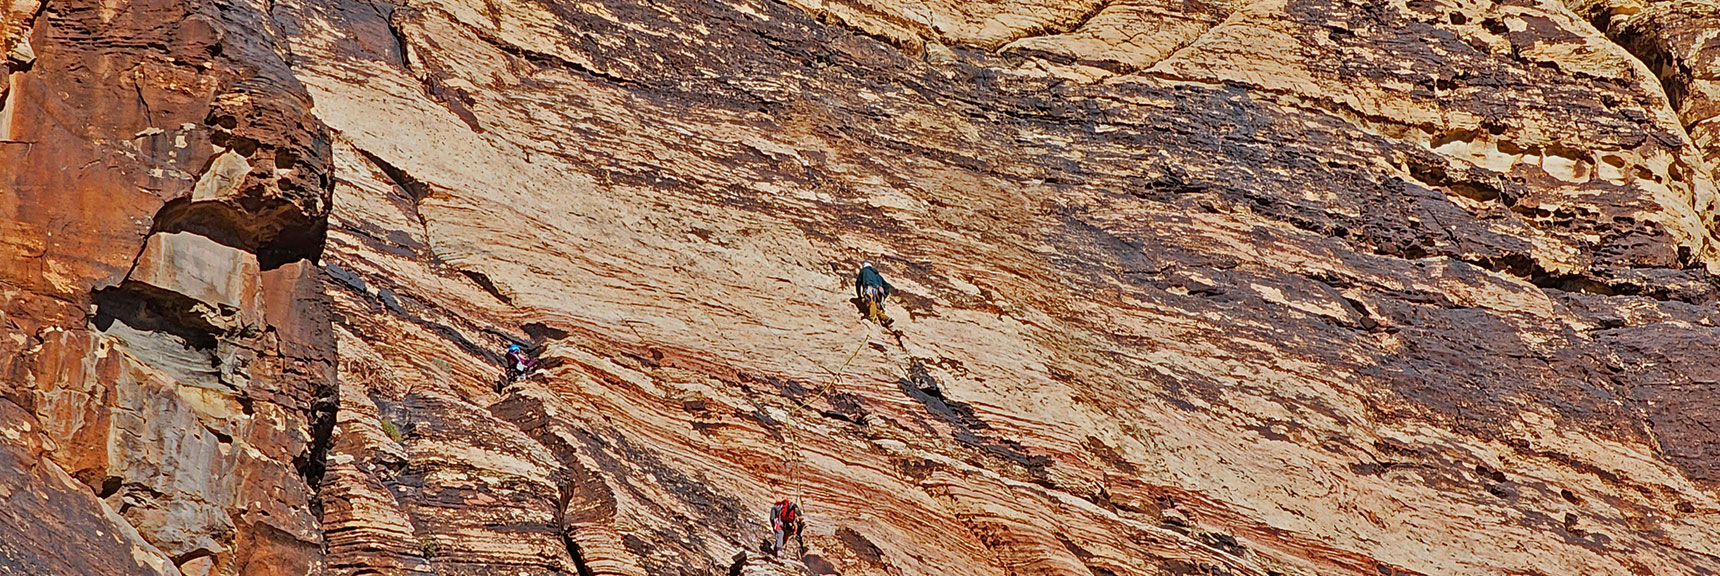 Just as Sheer and Vertical as the Mescalito Pyramid Cliffs. | Rock Climber Observations | Pine Creek Canyon | Rainbow Mountain Wilderness, Nevada